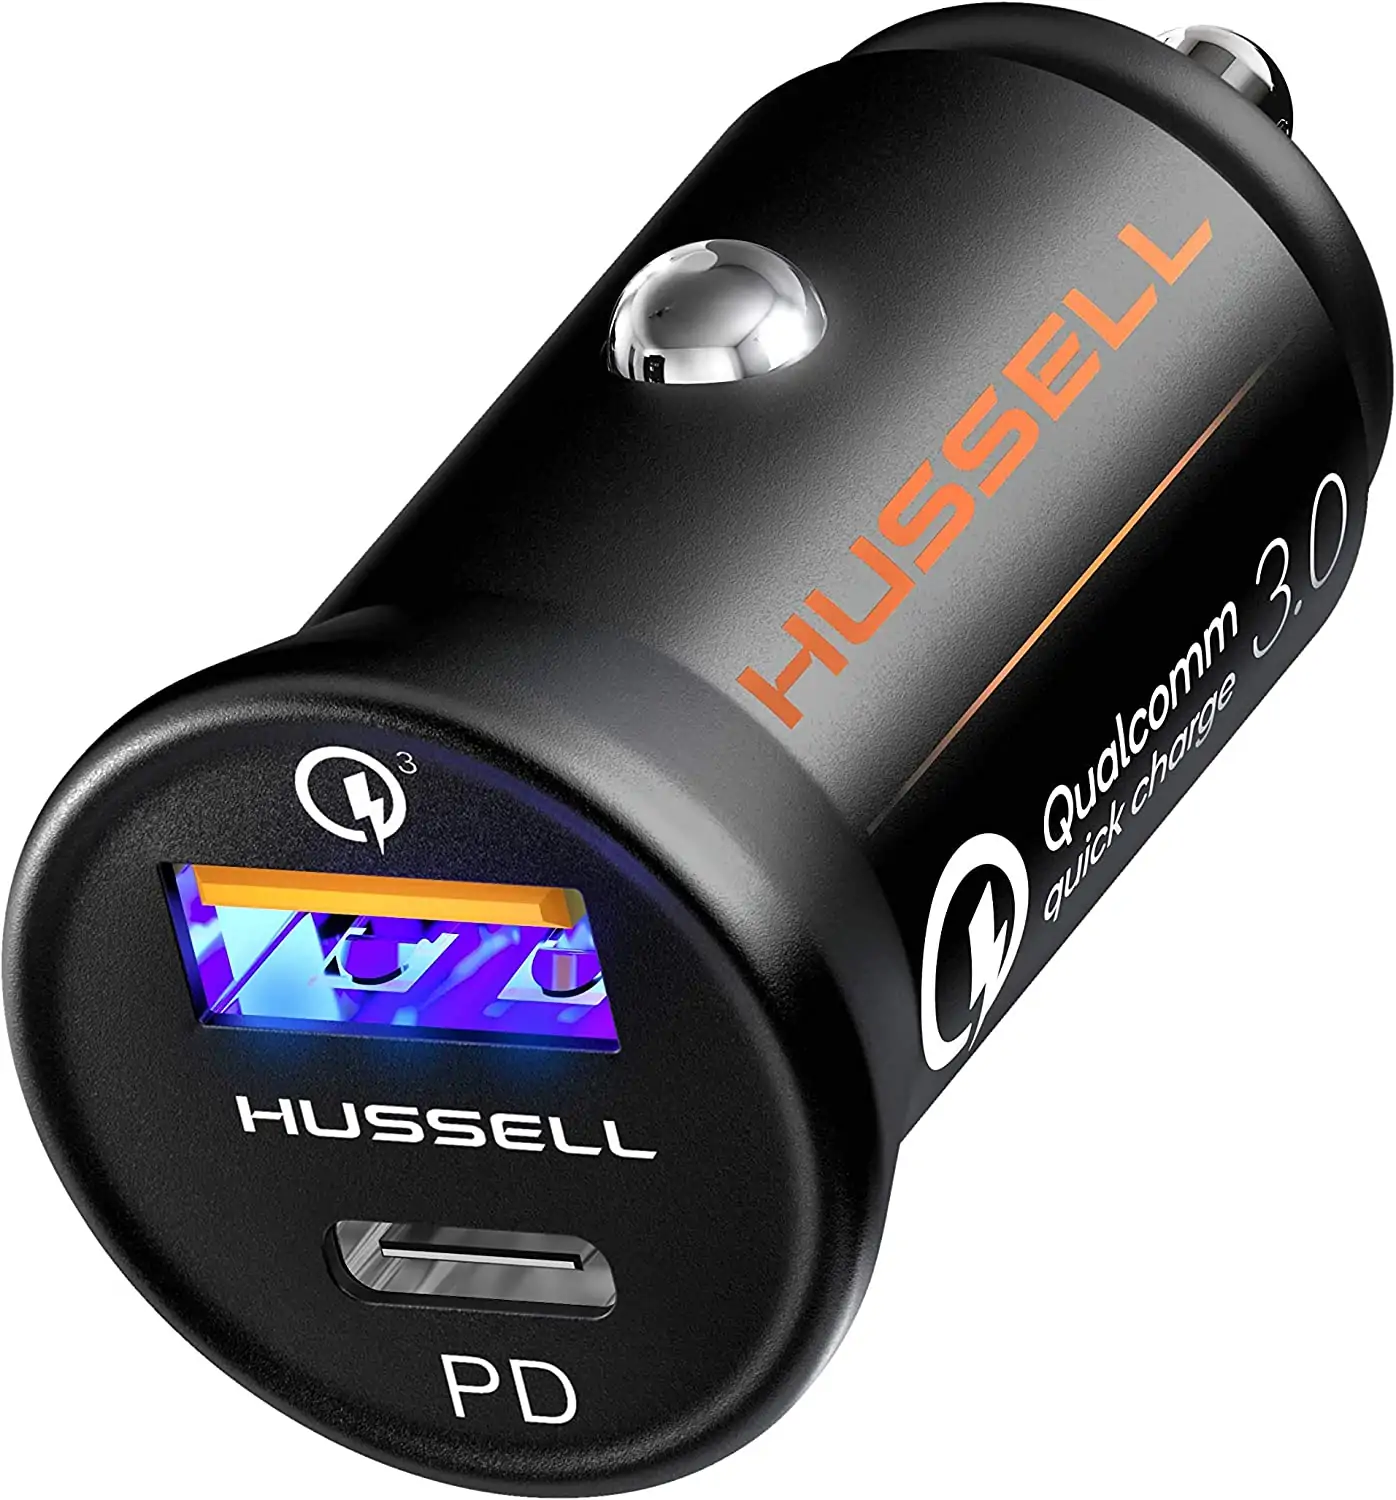 Hussell Car Charger Adapter for Cigarette Lighter